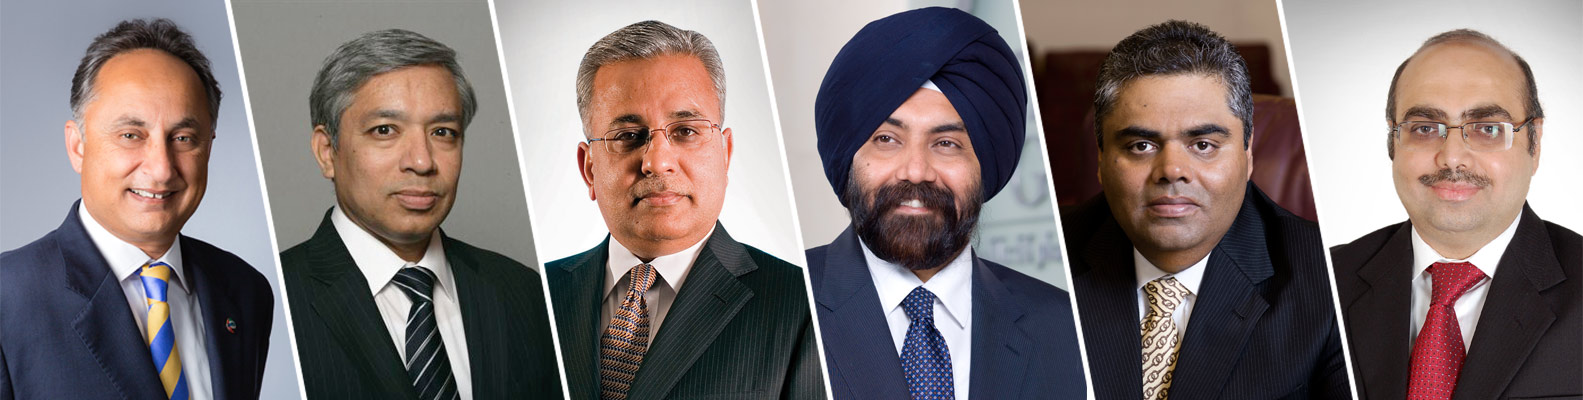 Top Indian leaders in the Arab World 2014 : Top 10 CFOs